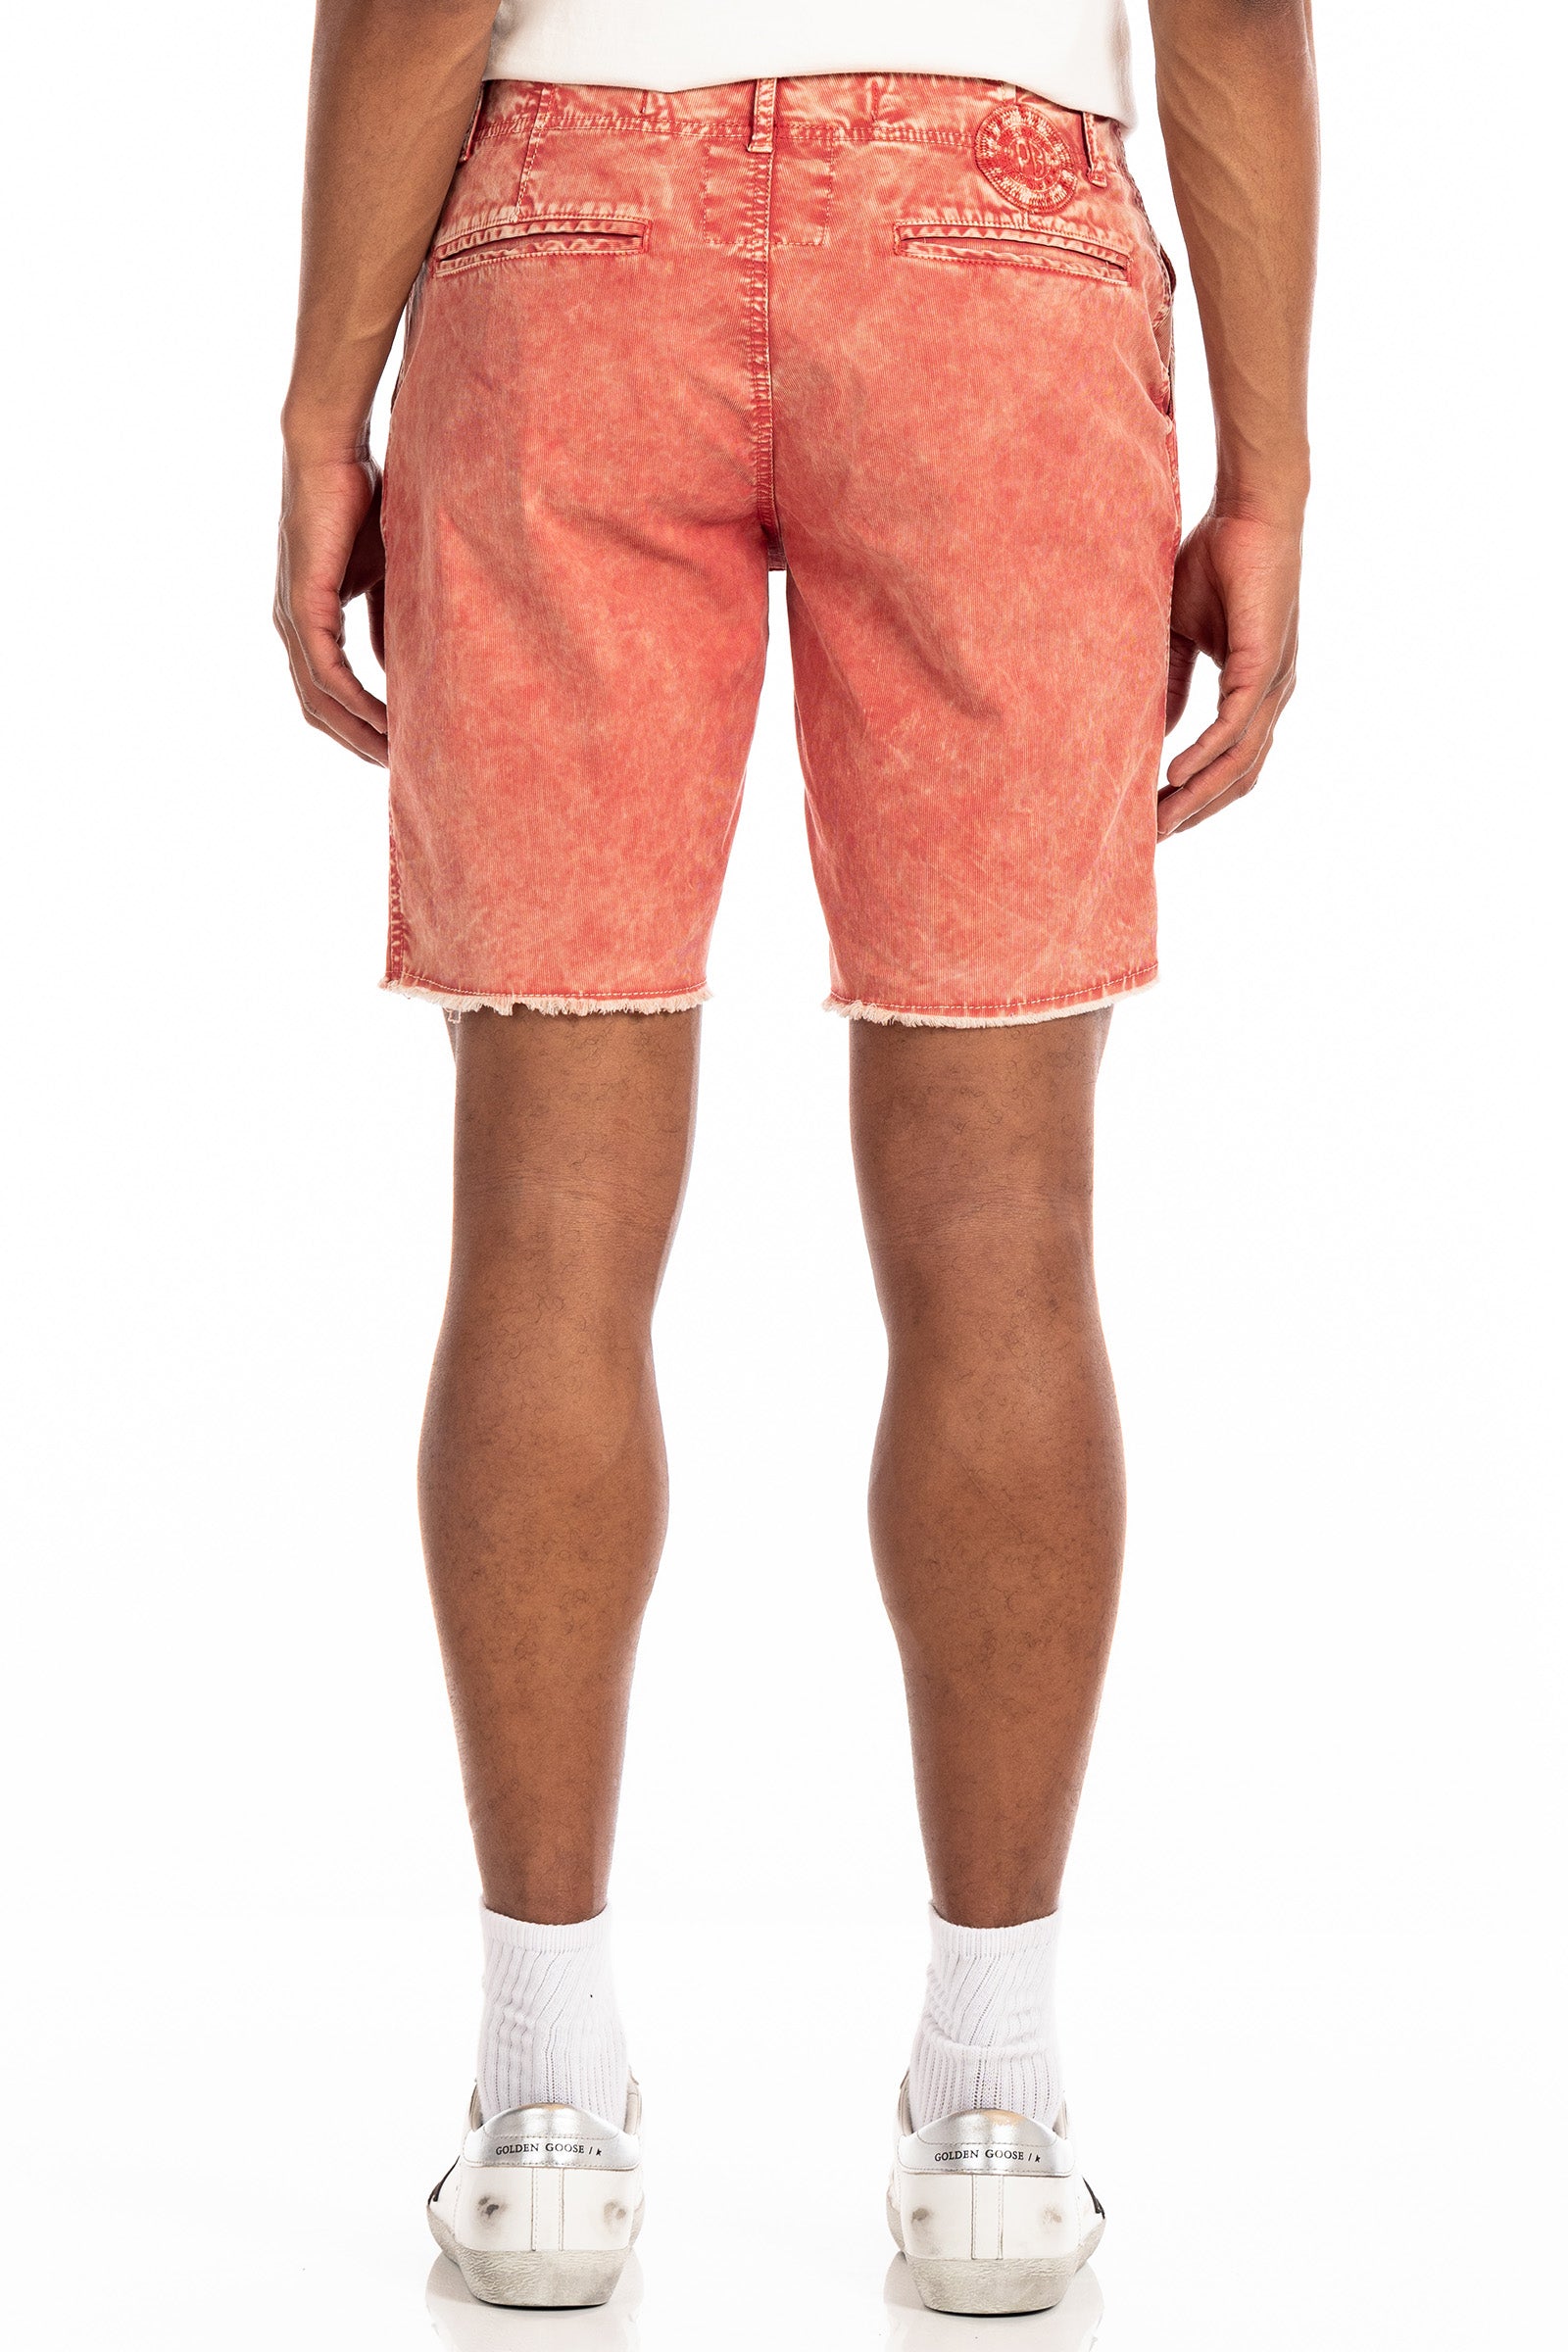 Original Paperbacks Brentwood Mineral Chino Short in Tangerine on Model Cropped Back View